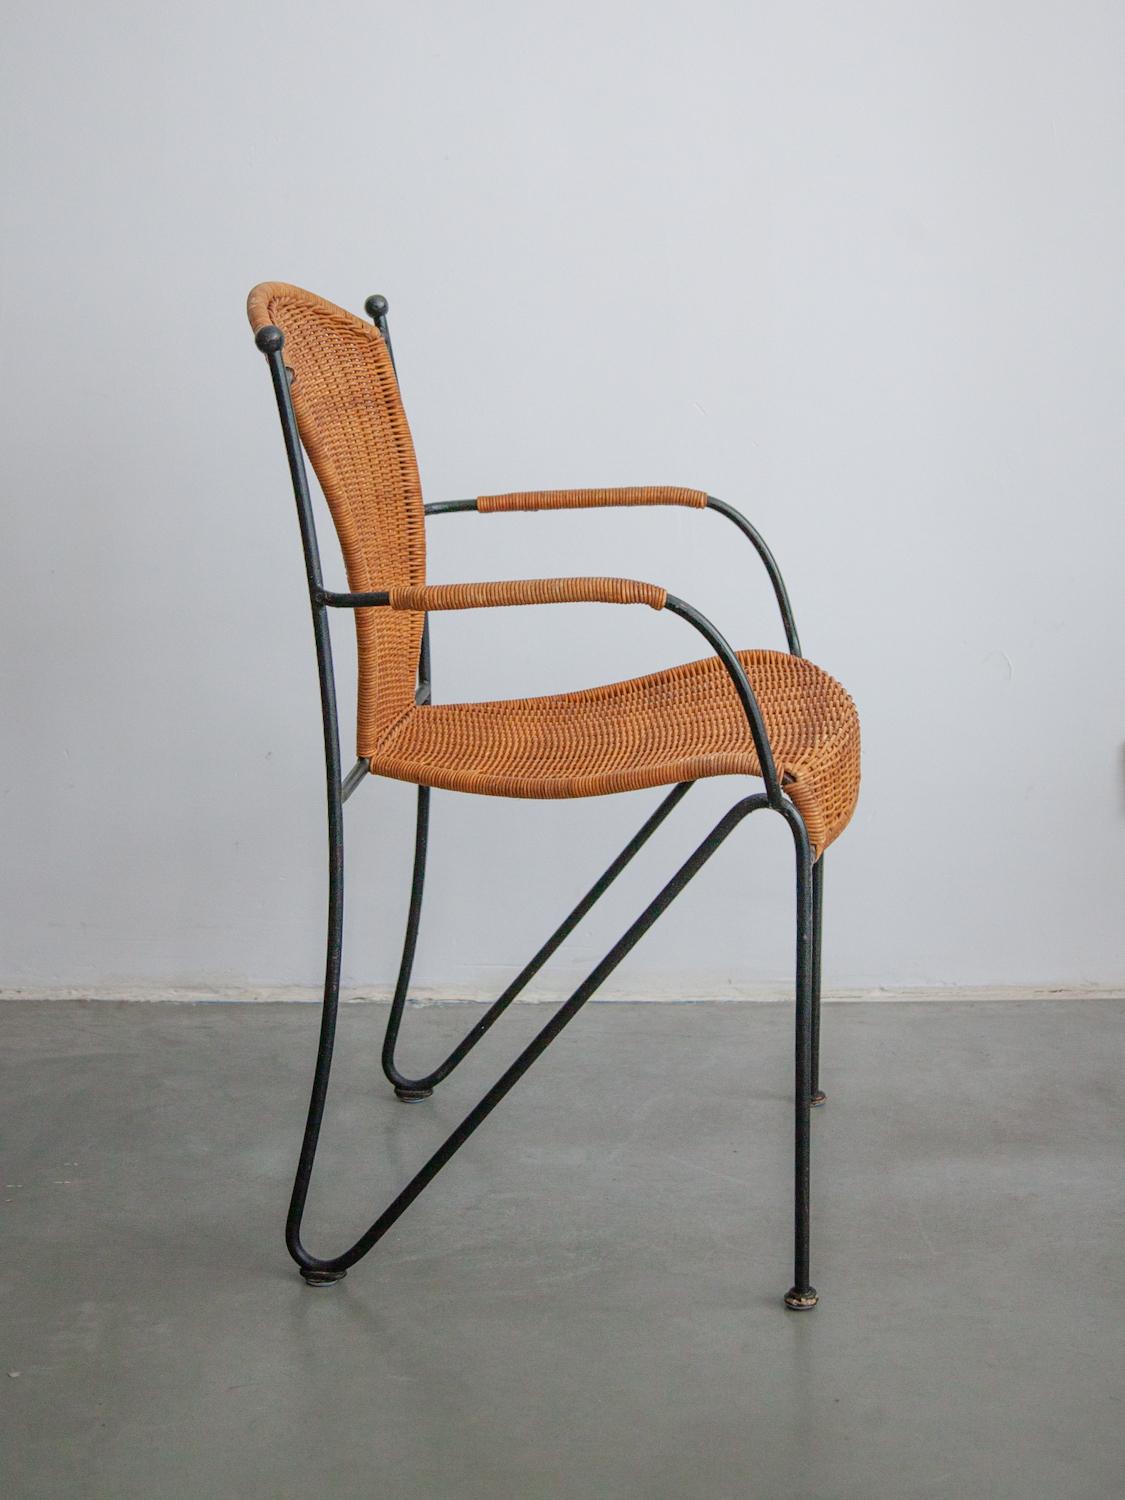 Six Iron and Rattan Indoor and Outdoor Patio Chairs by Pipsan Saarinen Swanson 8